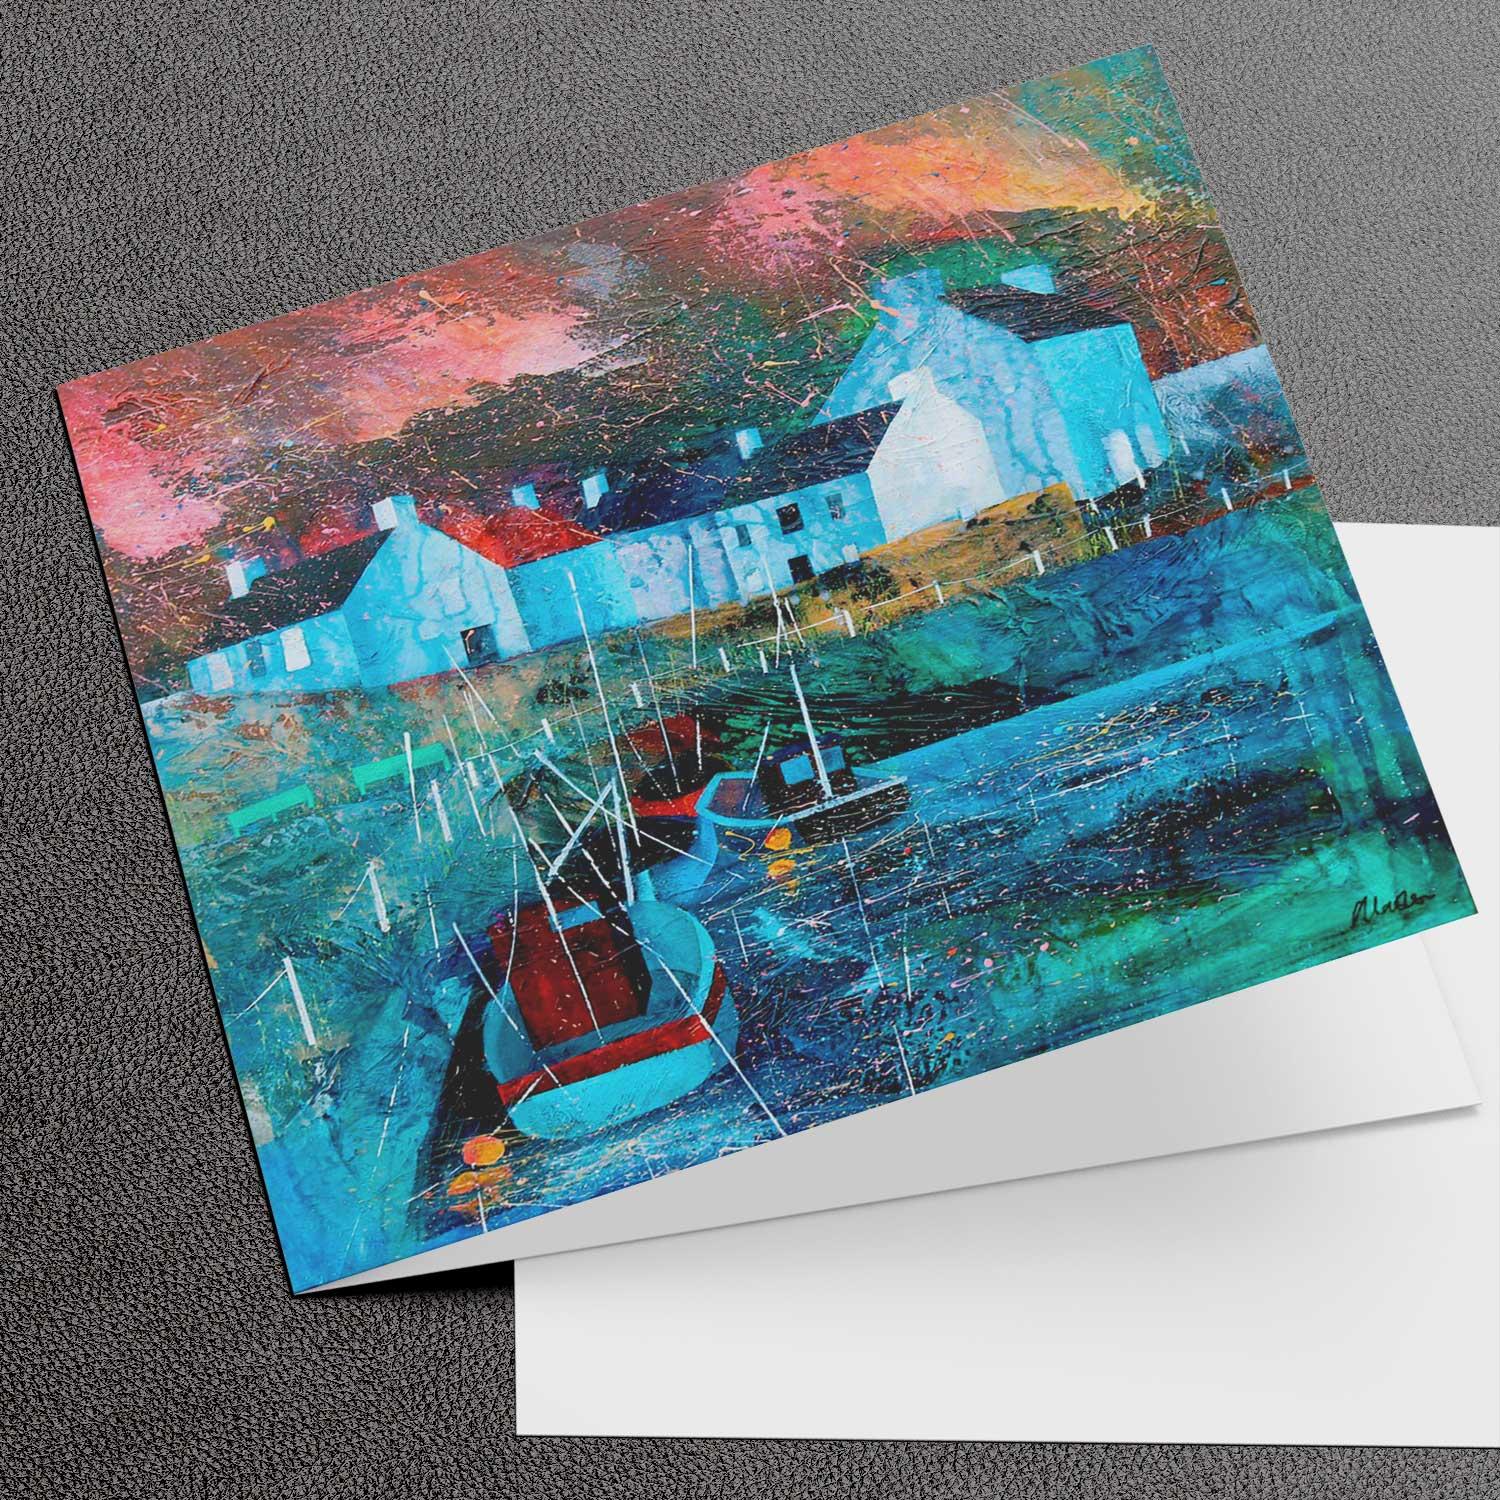 Boats and Benches Greeting Card from an original painting by artist Fiona Matheson